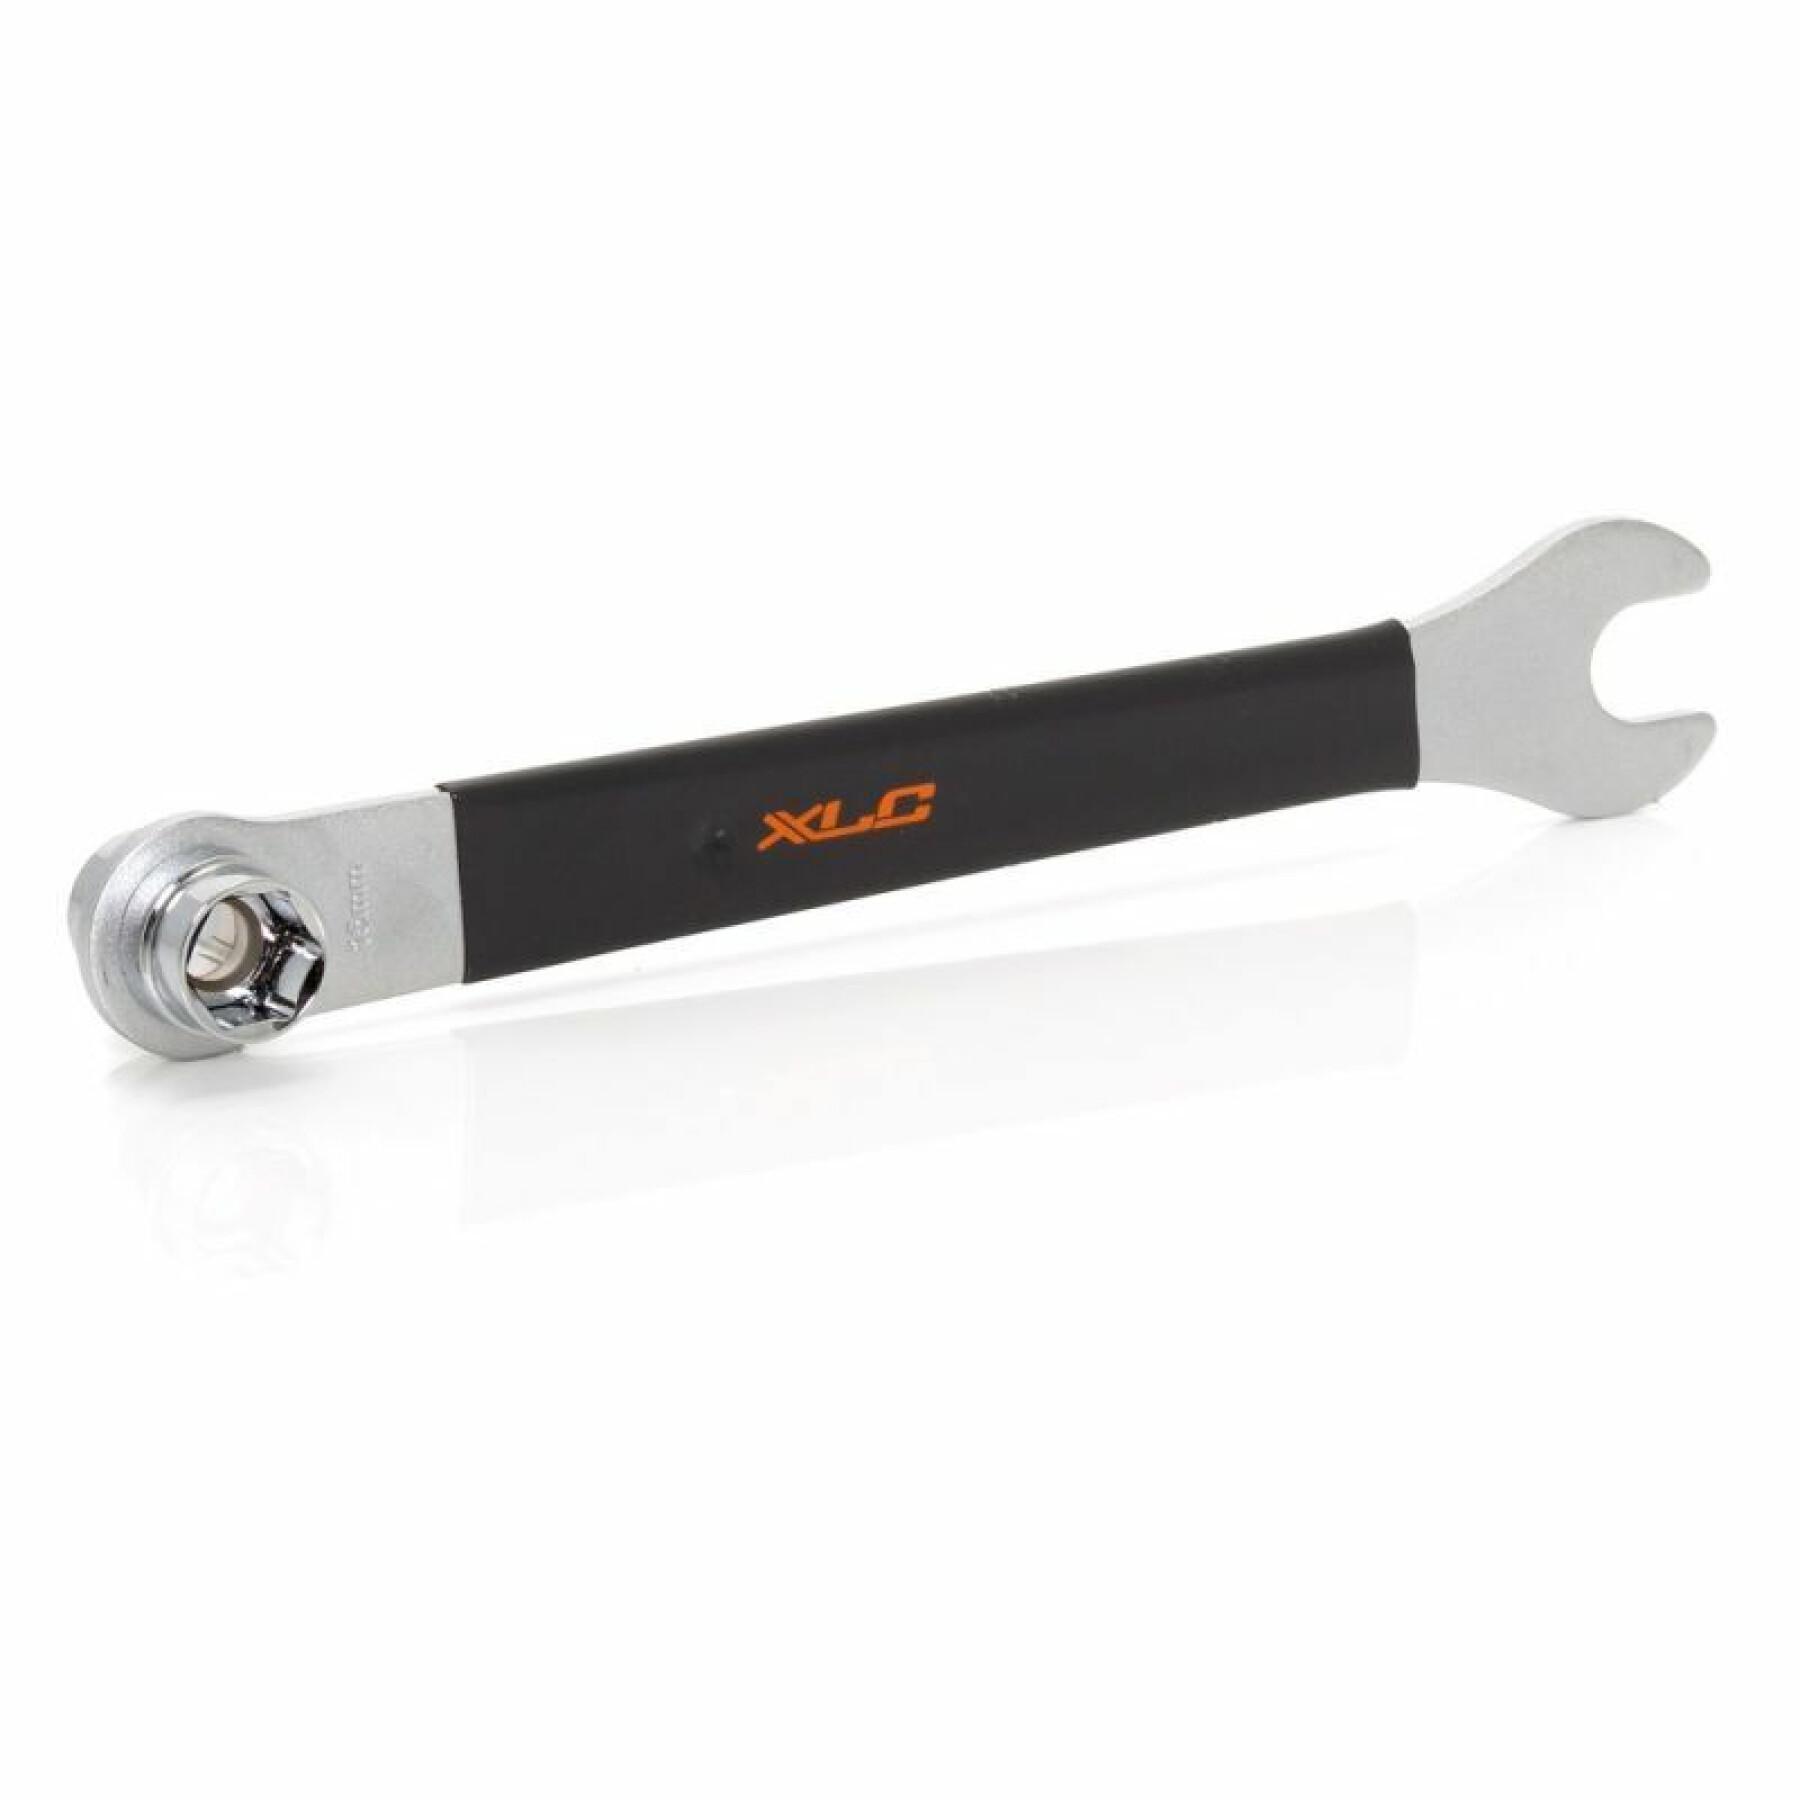 Pedal wrench and crank handle with hexagonal head XLC TO-S19